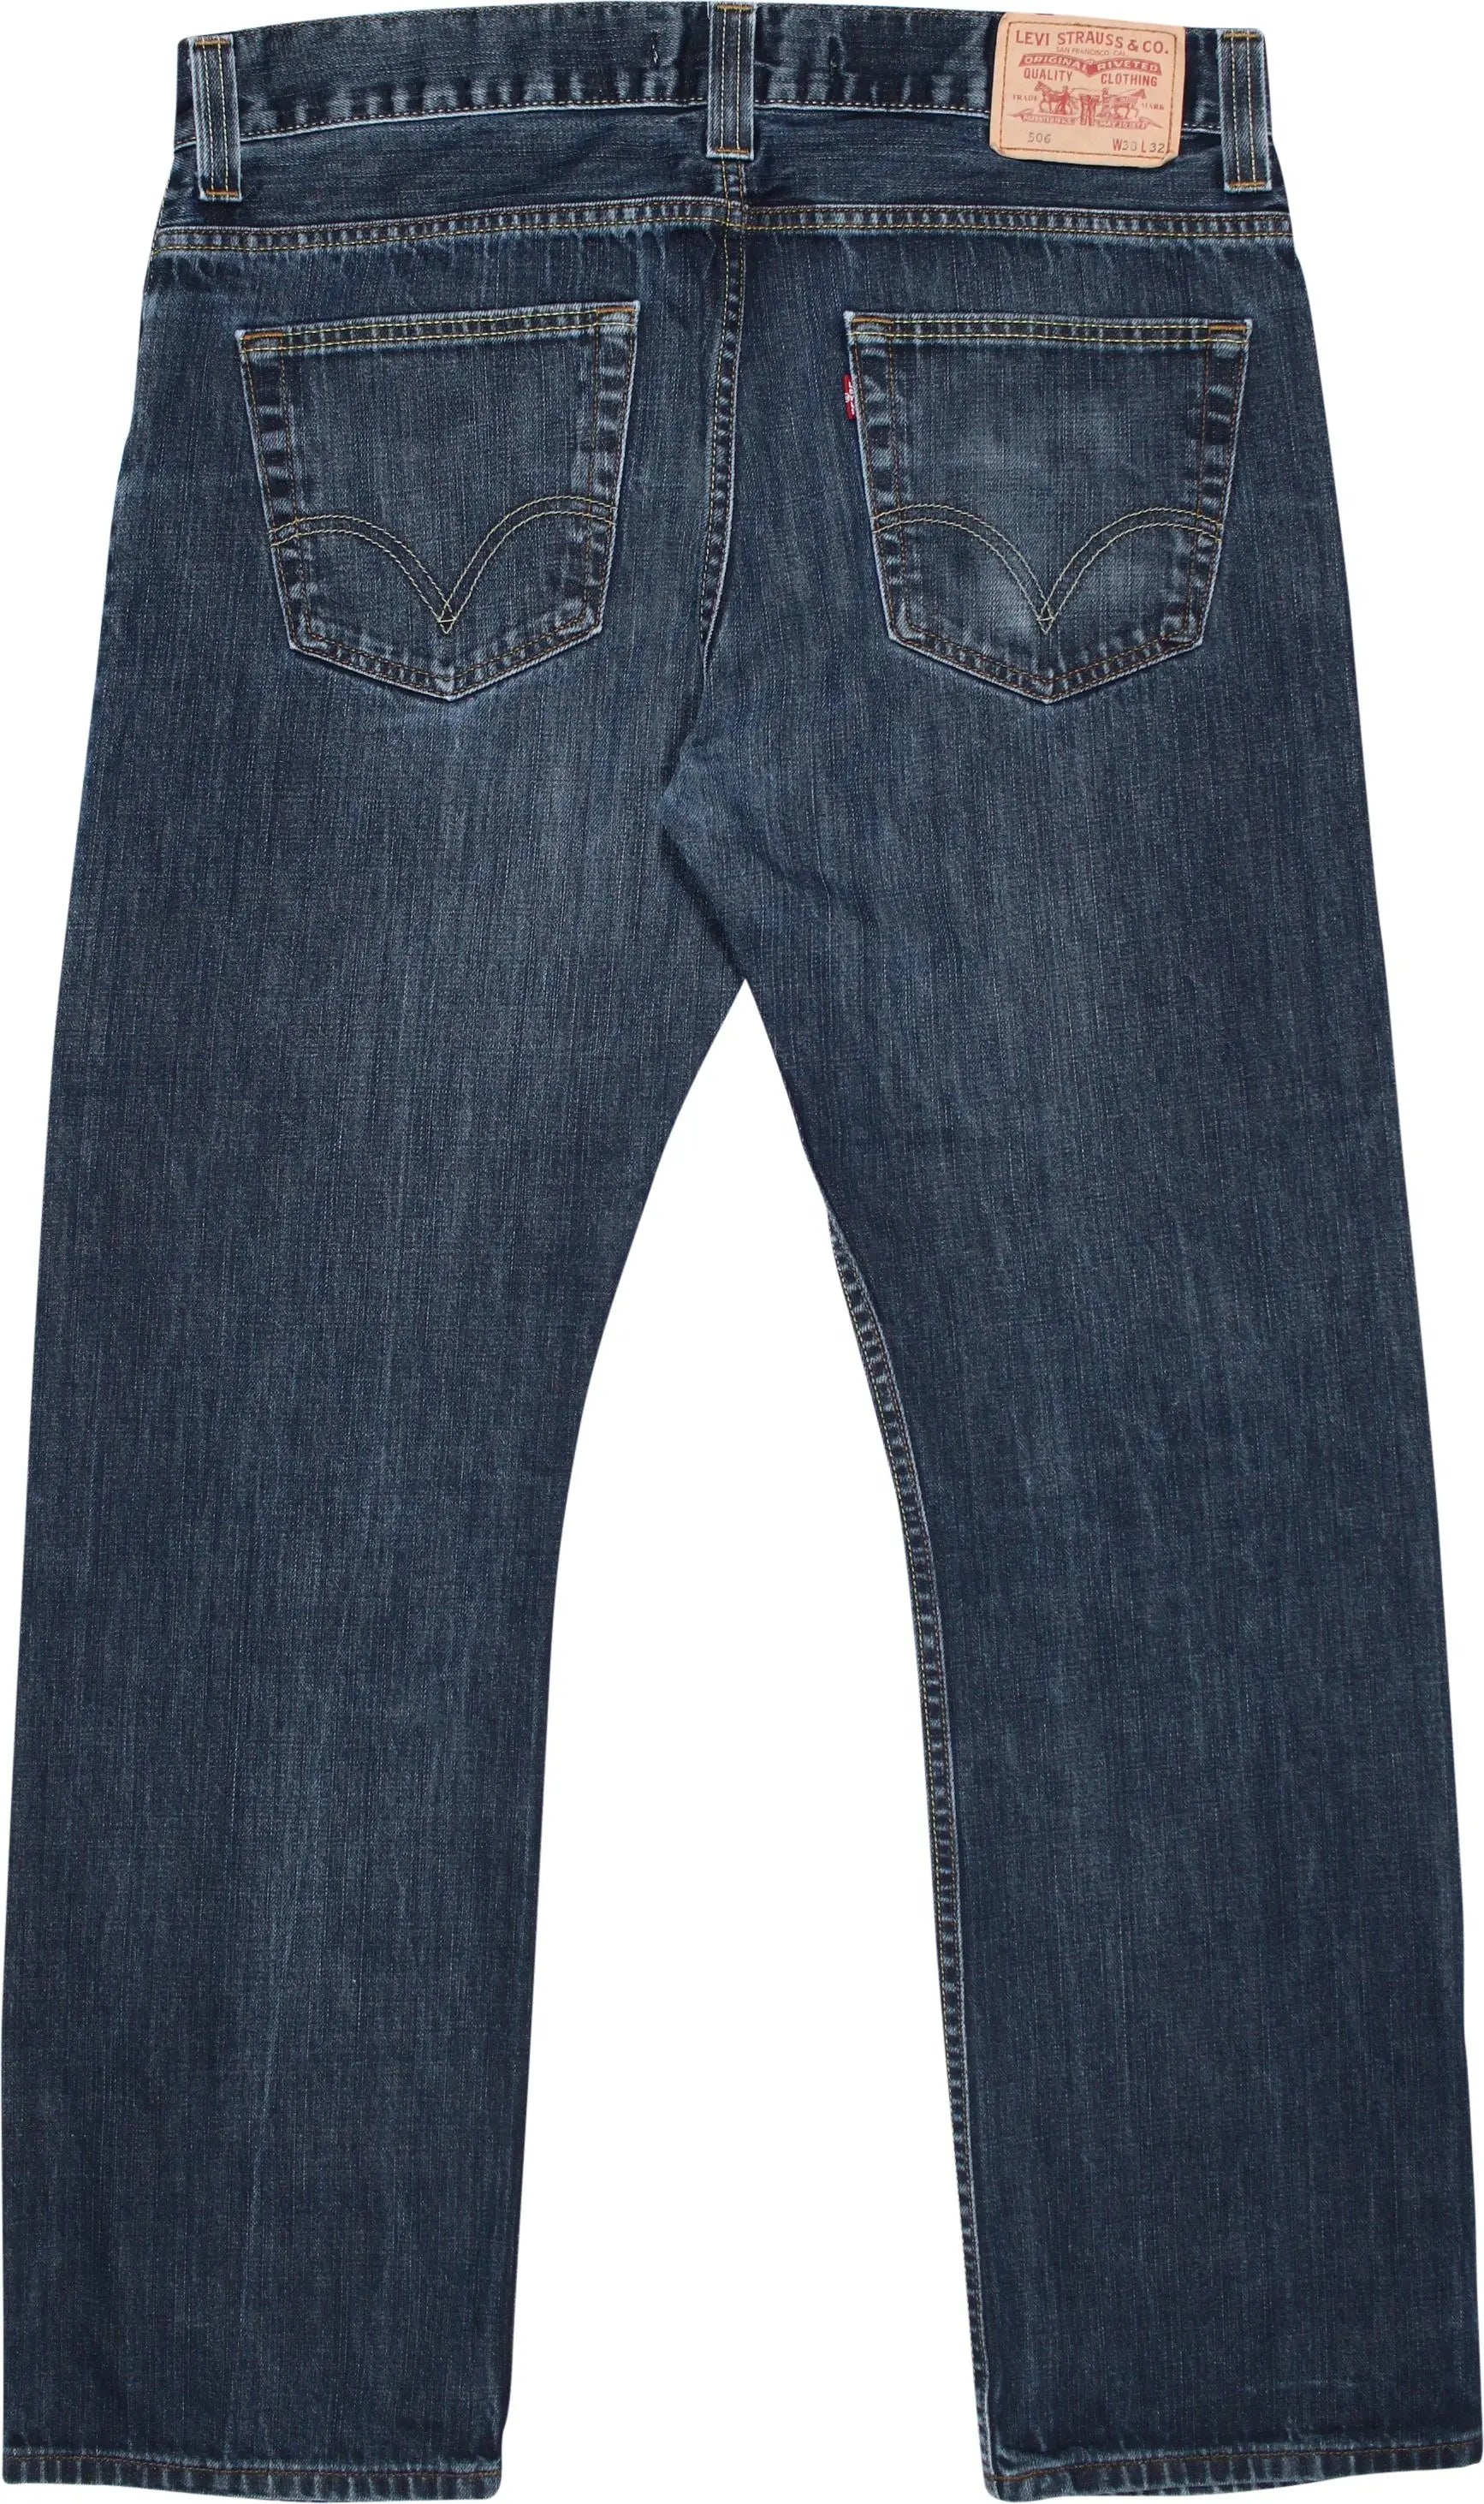 Levi's - 506 Jeans by Levi's- ThriftTale.com - Vintage and second handclothing